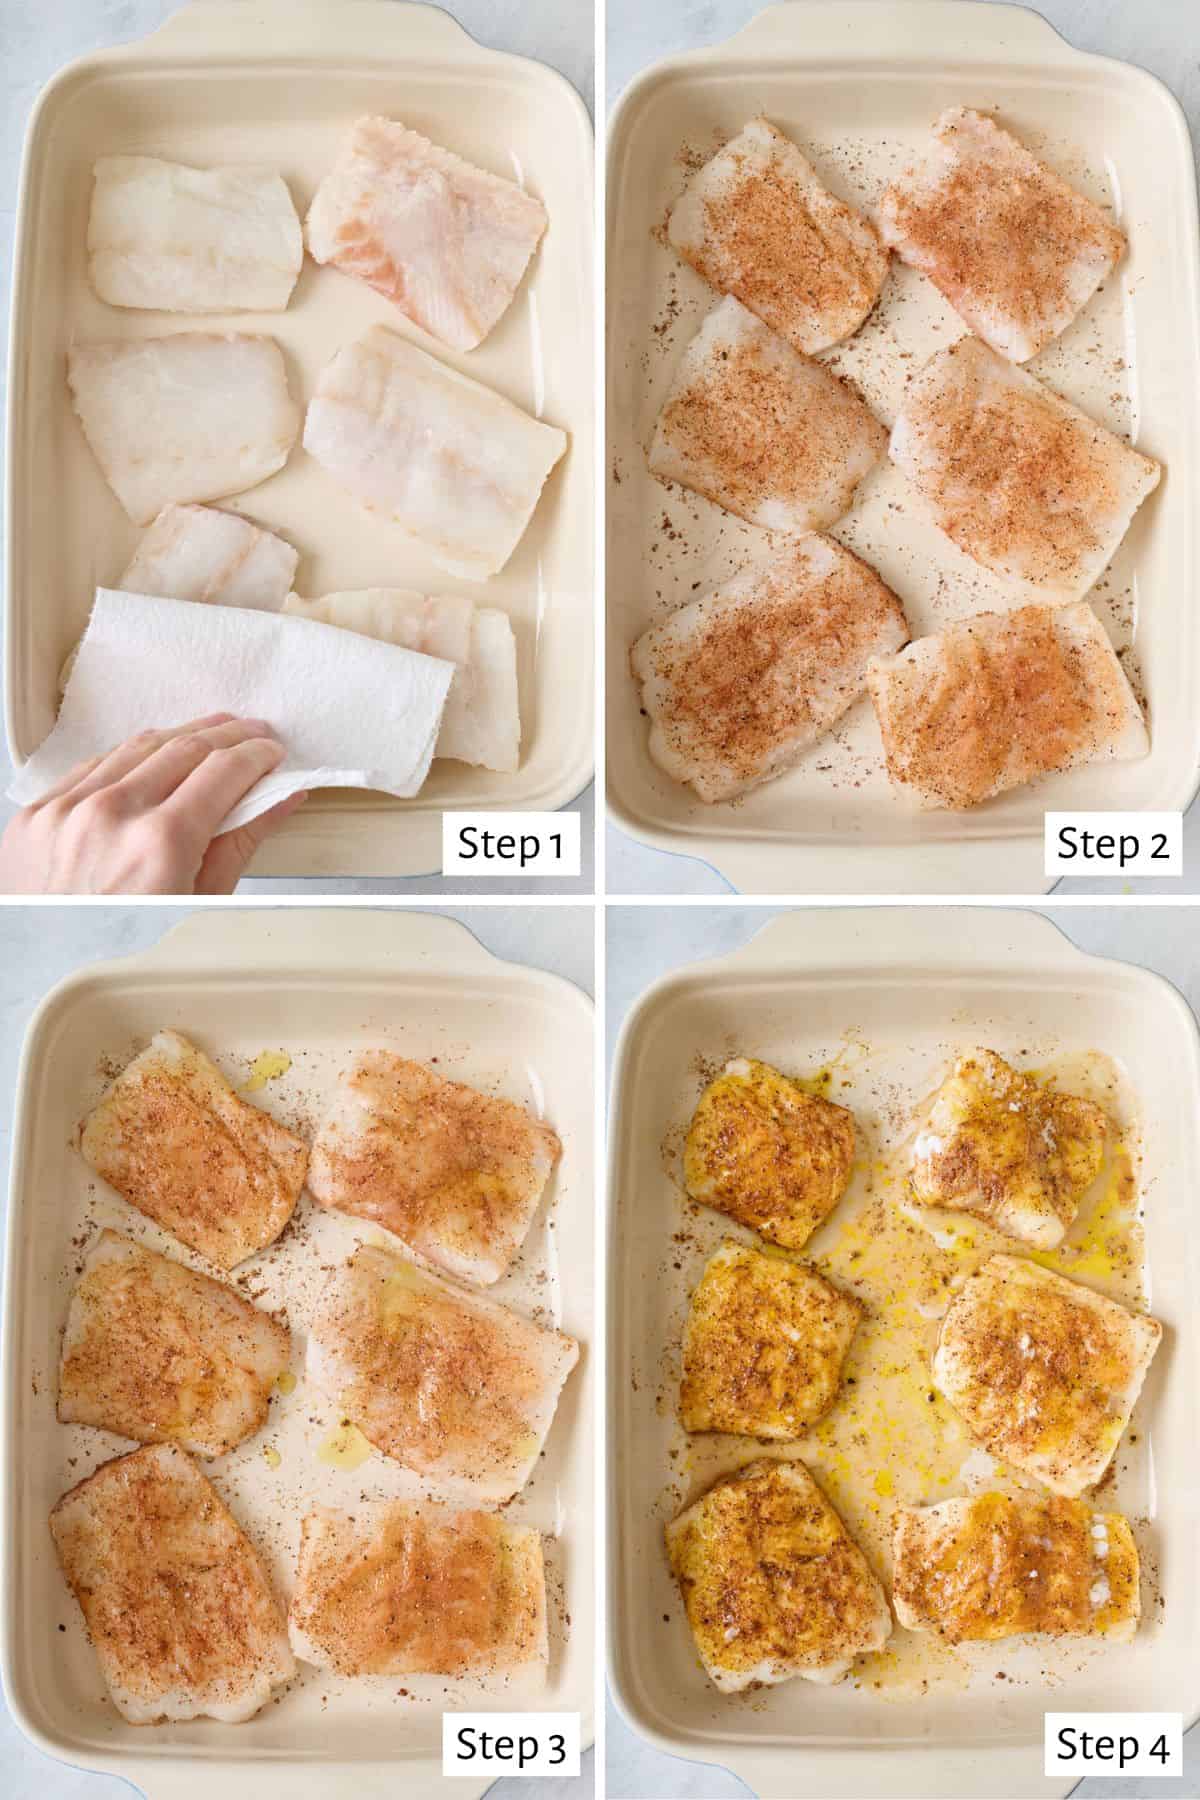 4-image collage preparing the fish: 1 - Cod fillets in a baking dish with paper towels patting them dry; 2 - After seasoning with cumin, salt, pepper, and cayenne pepper on both sides; 3 - After coating with oil; 4 - After baking.